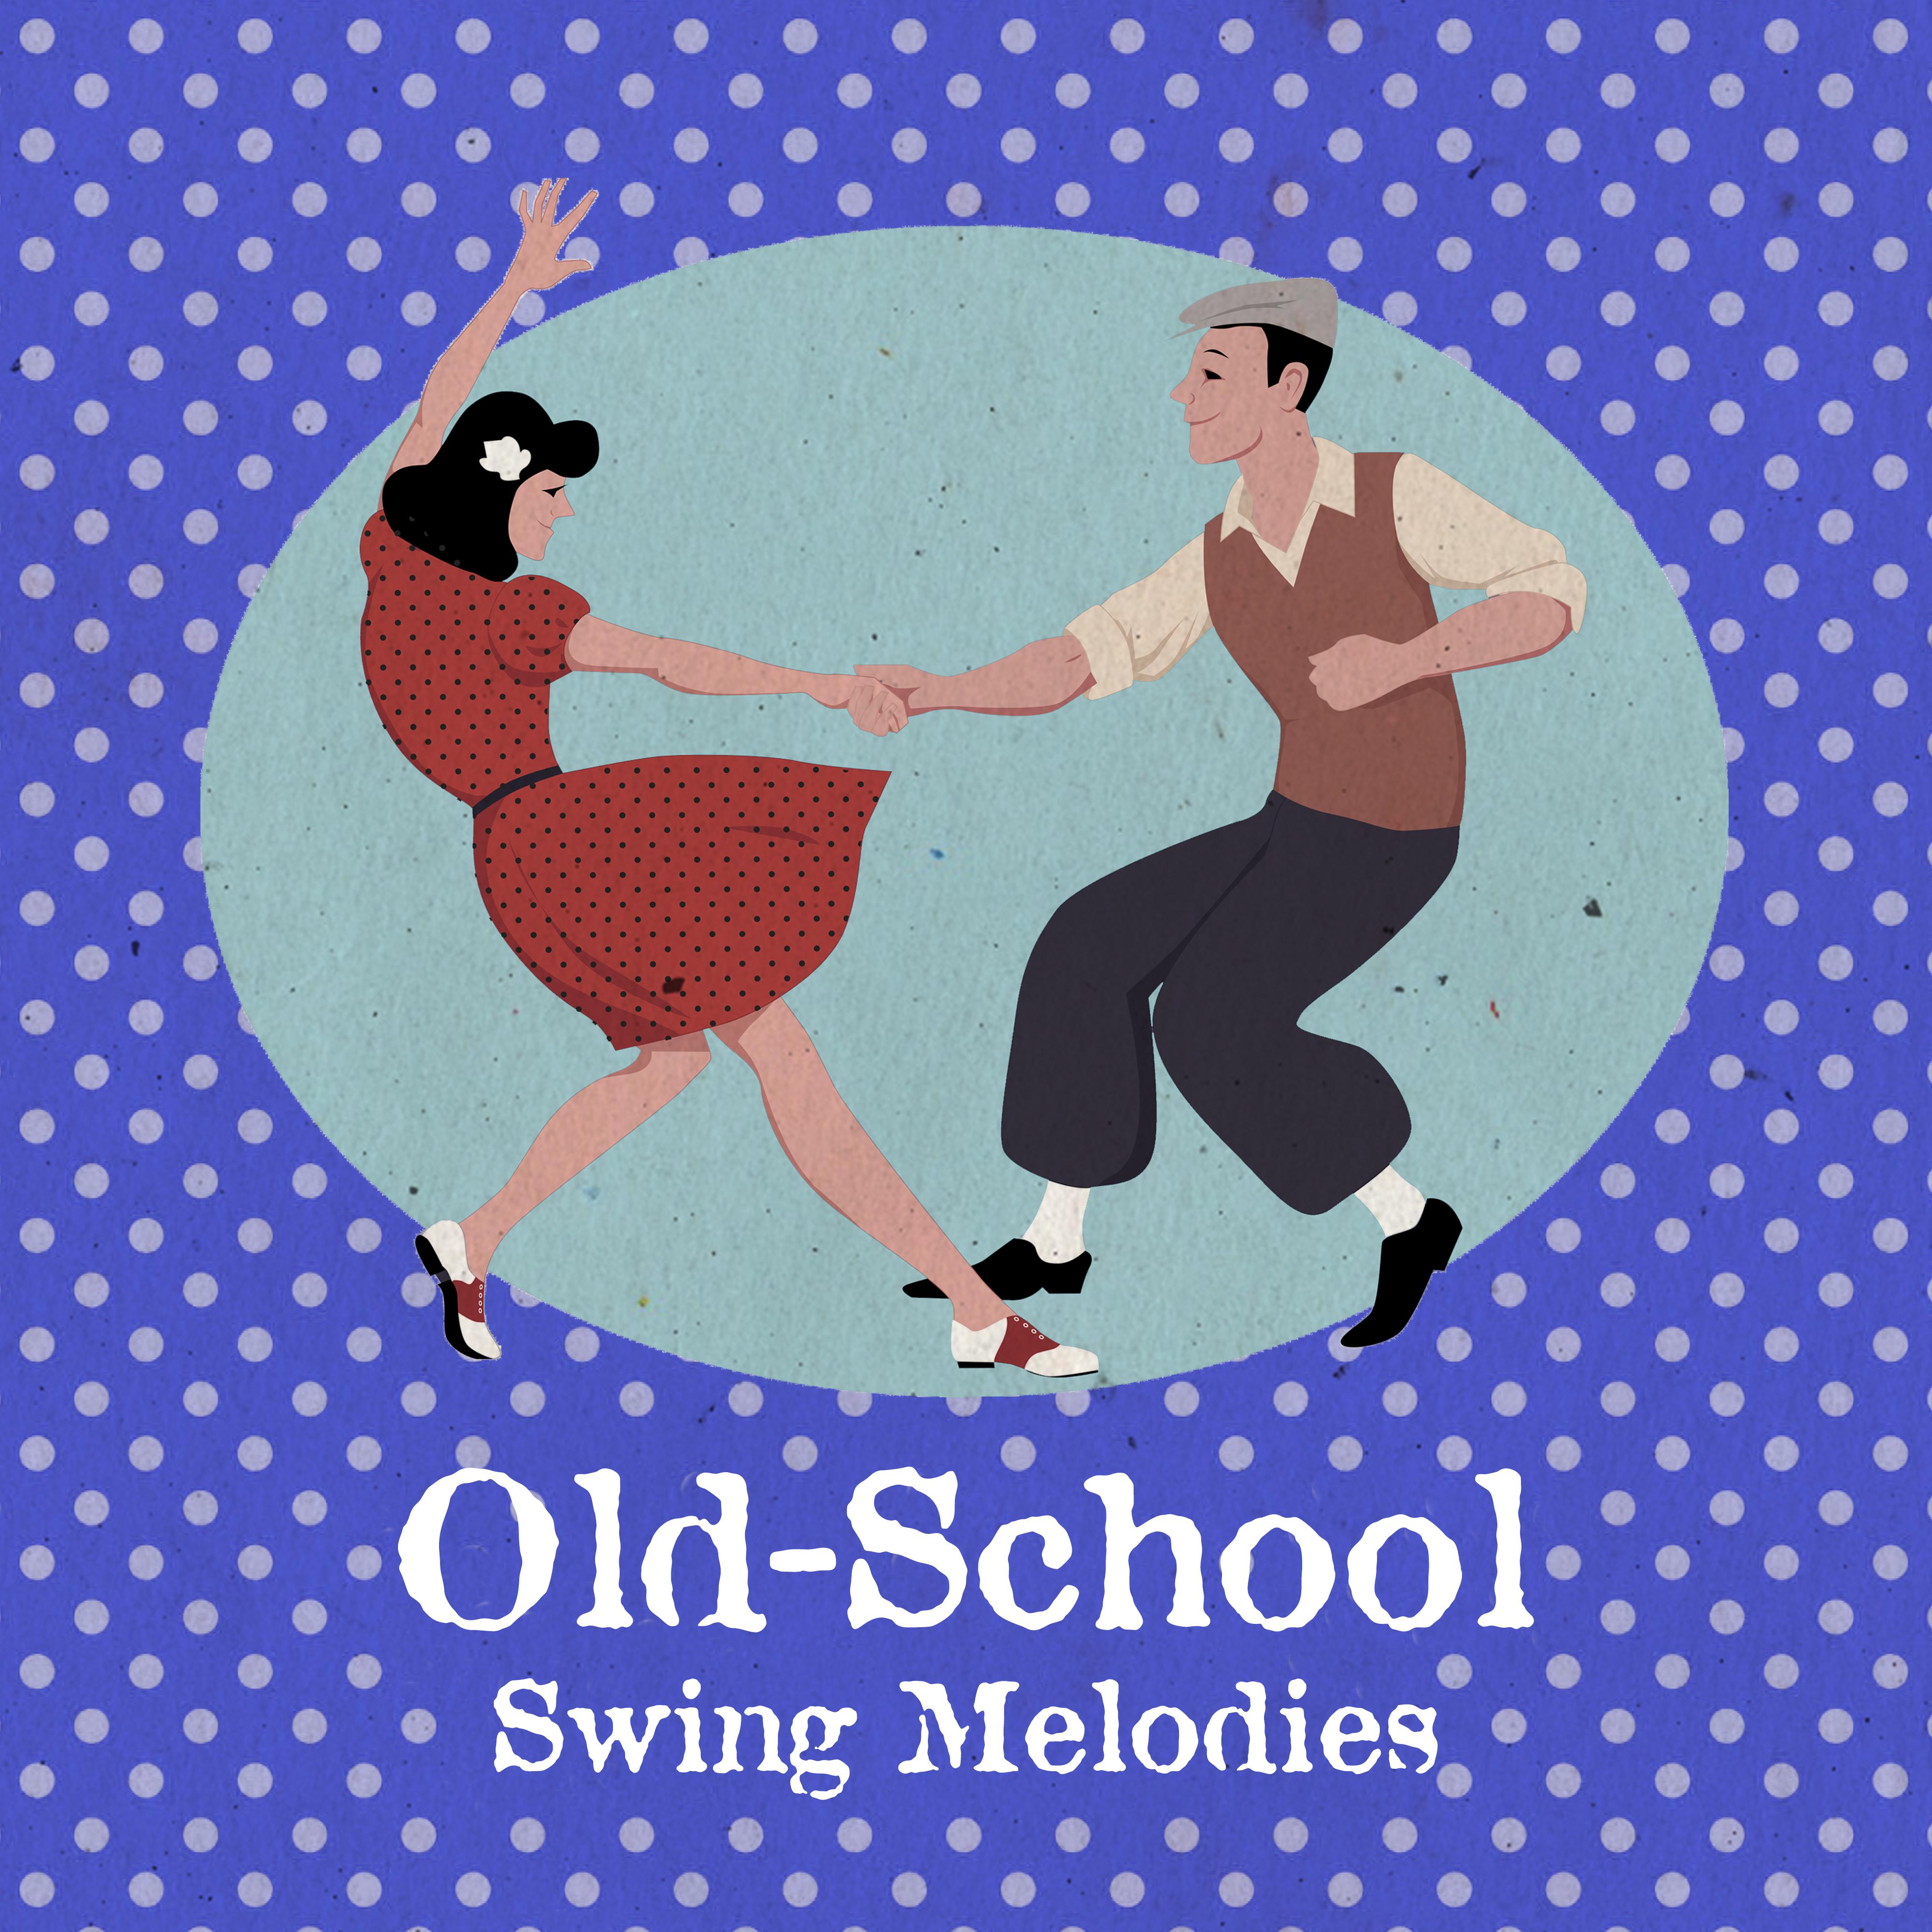 Old-School Swing Melodies: Jazz Compositions of the Last Century